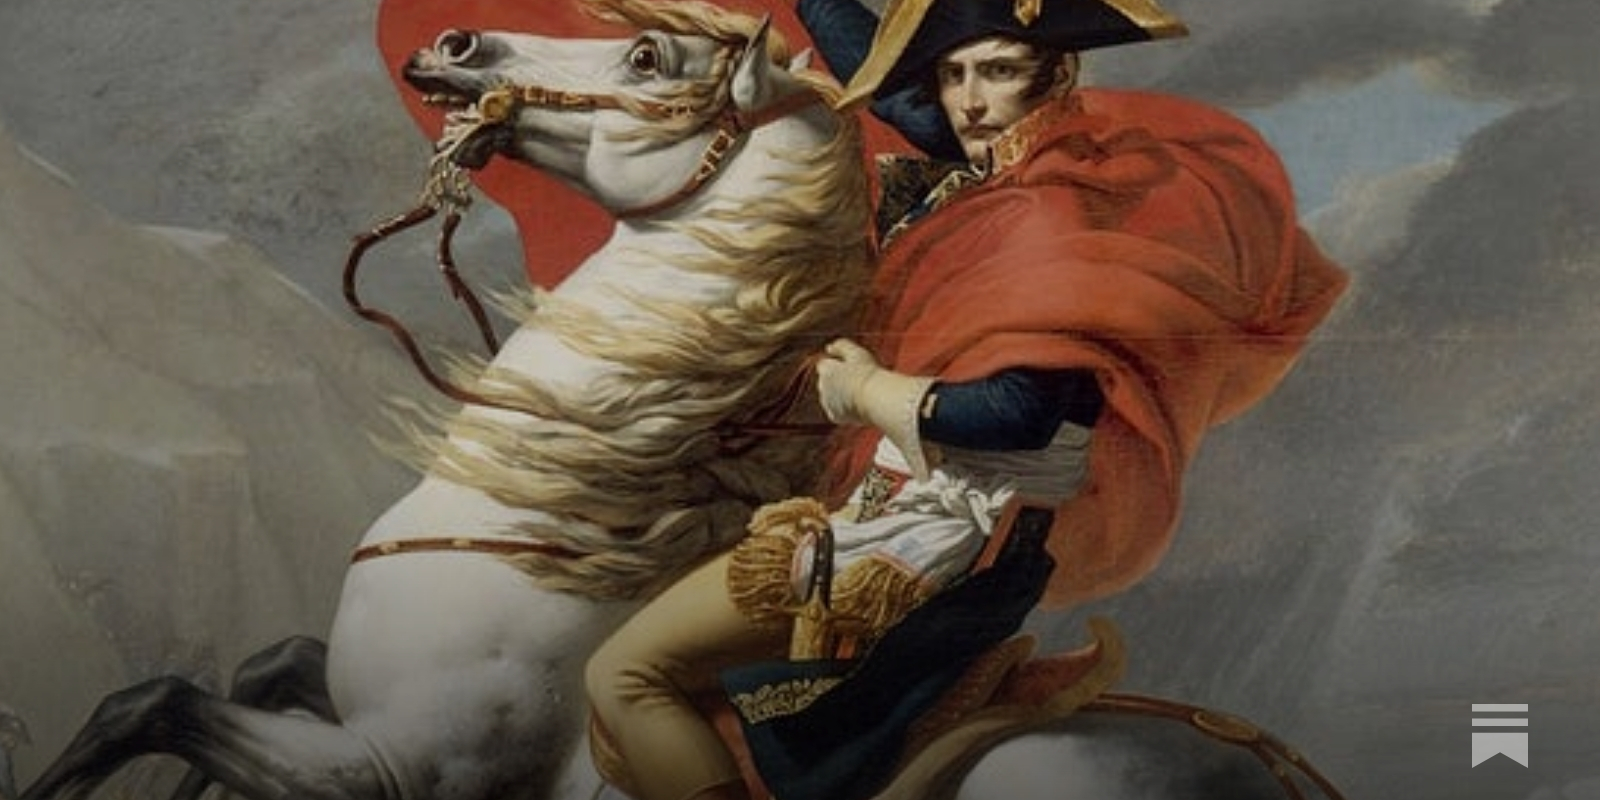 Napoleon: A Life,' by Andrew Roberts - The New York Times